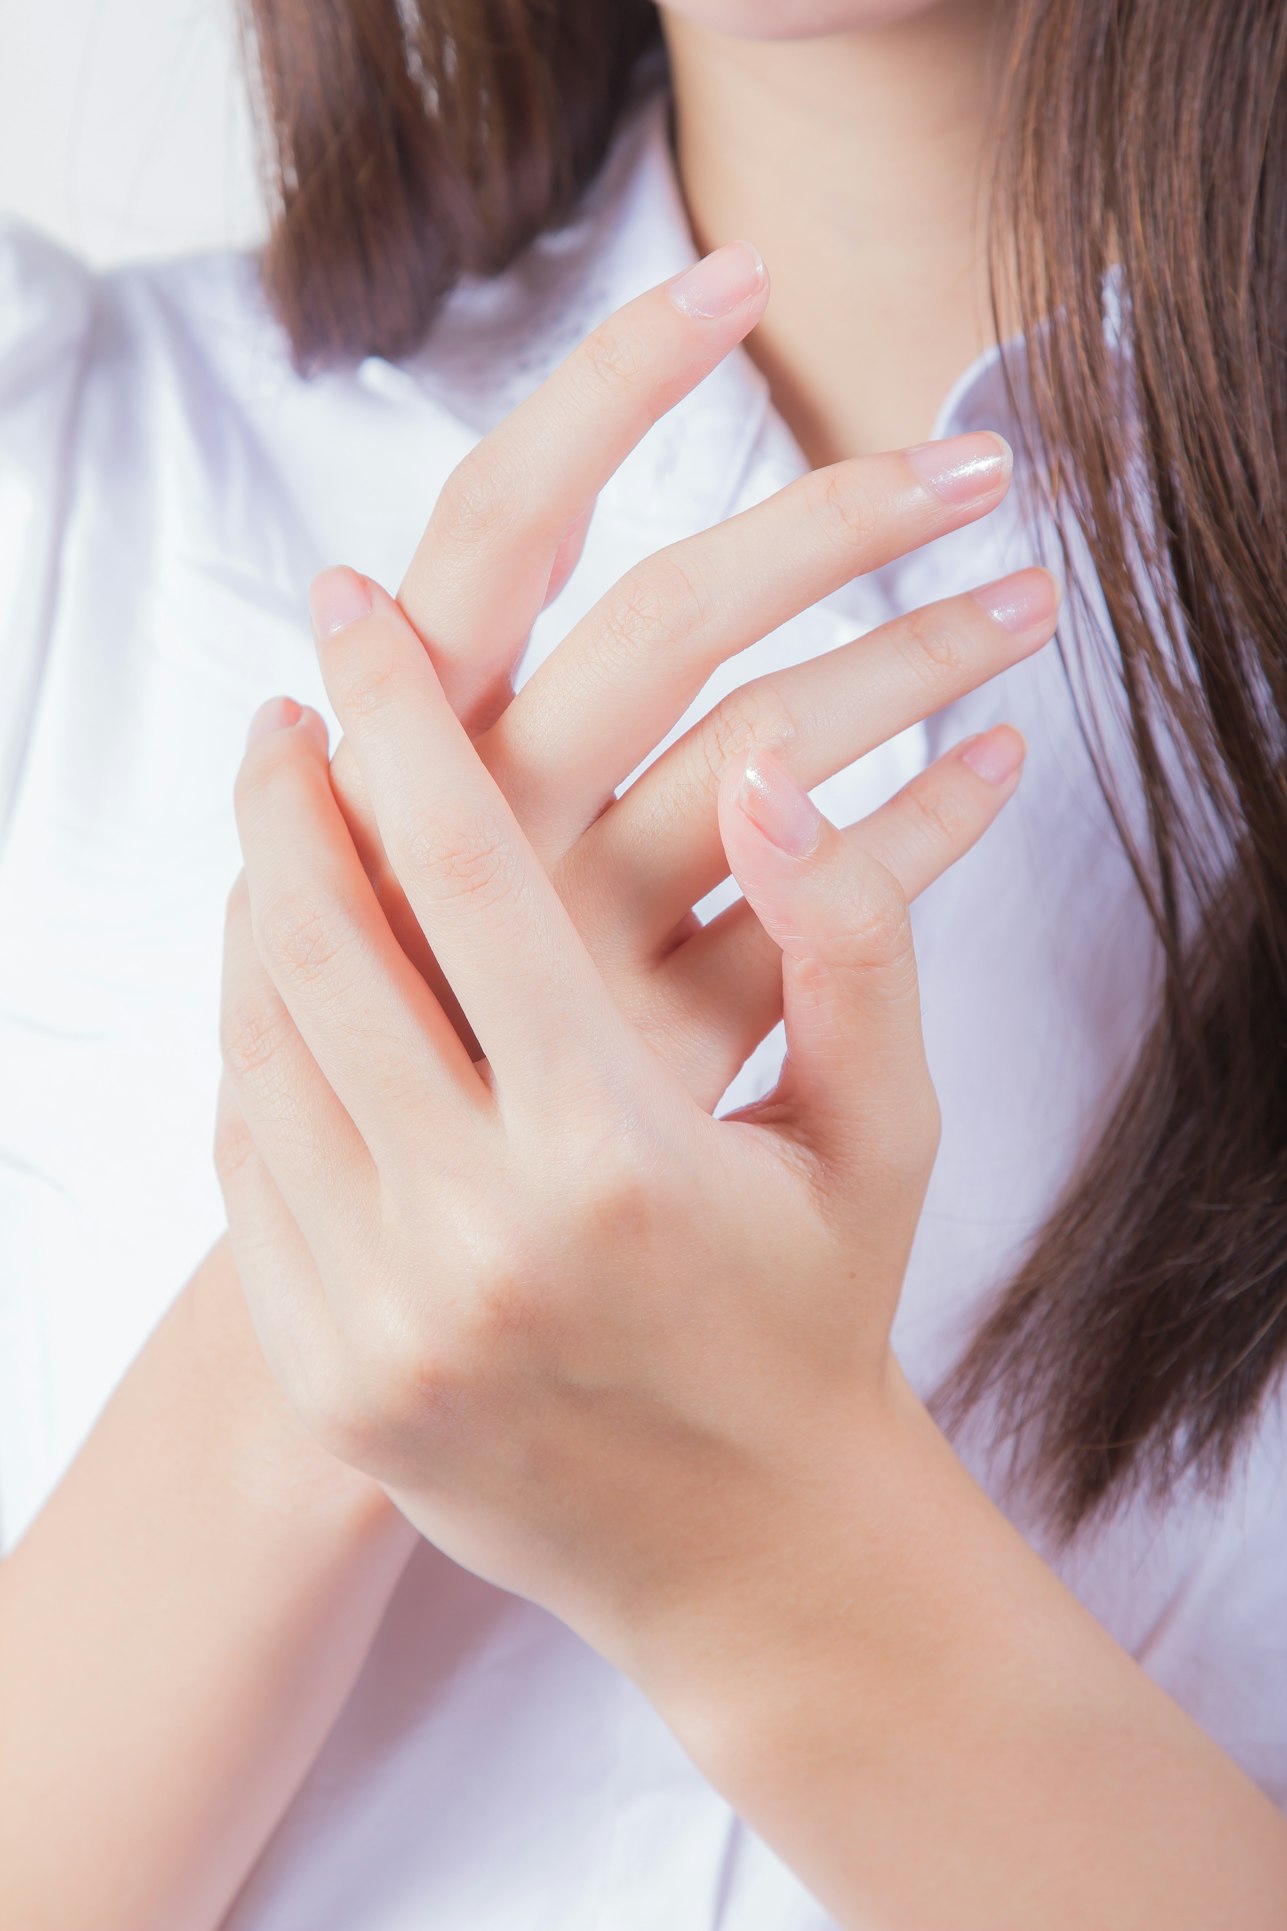 Benefits Of Proper Nail Care That You Didn’t Know Before